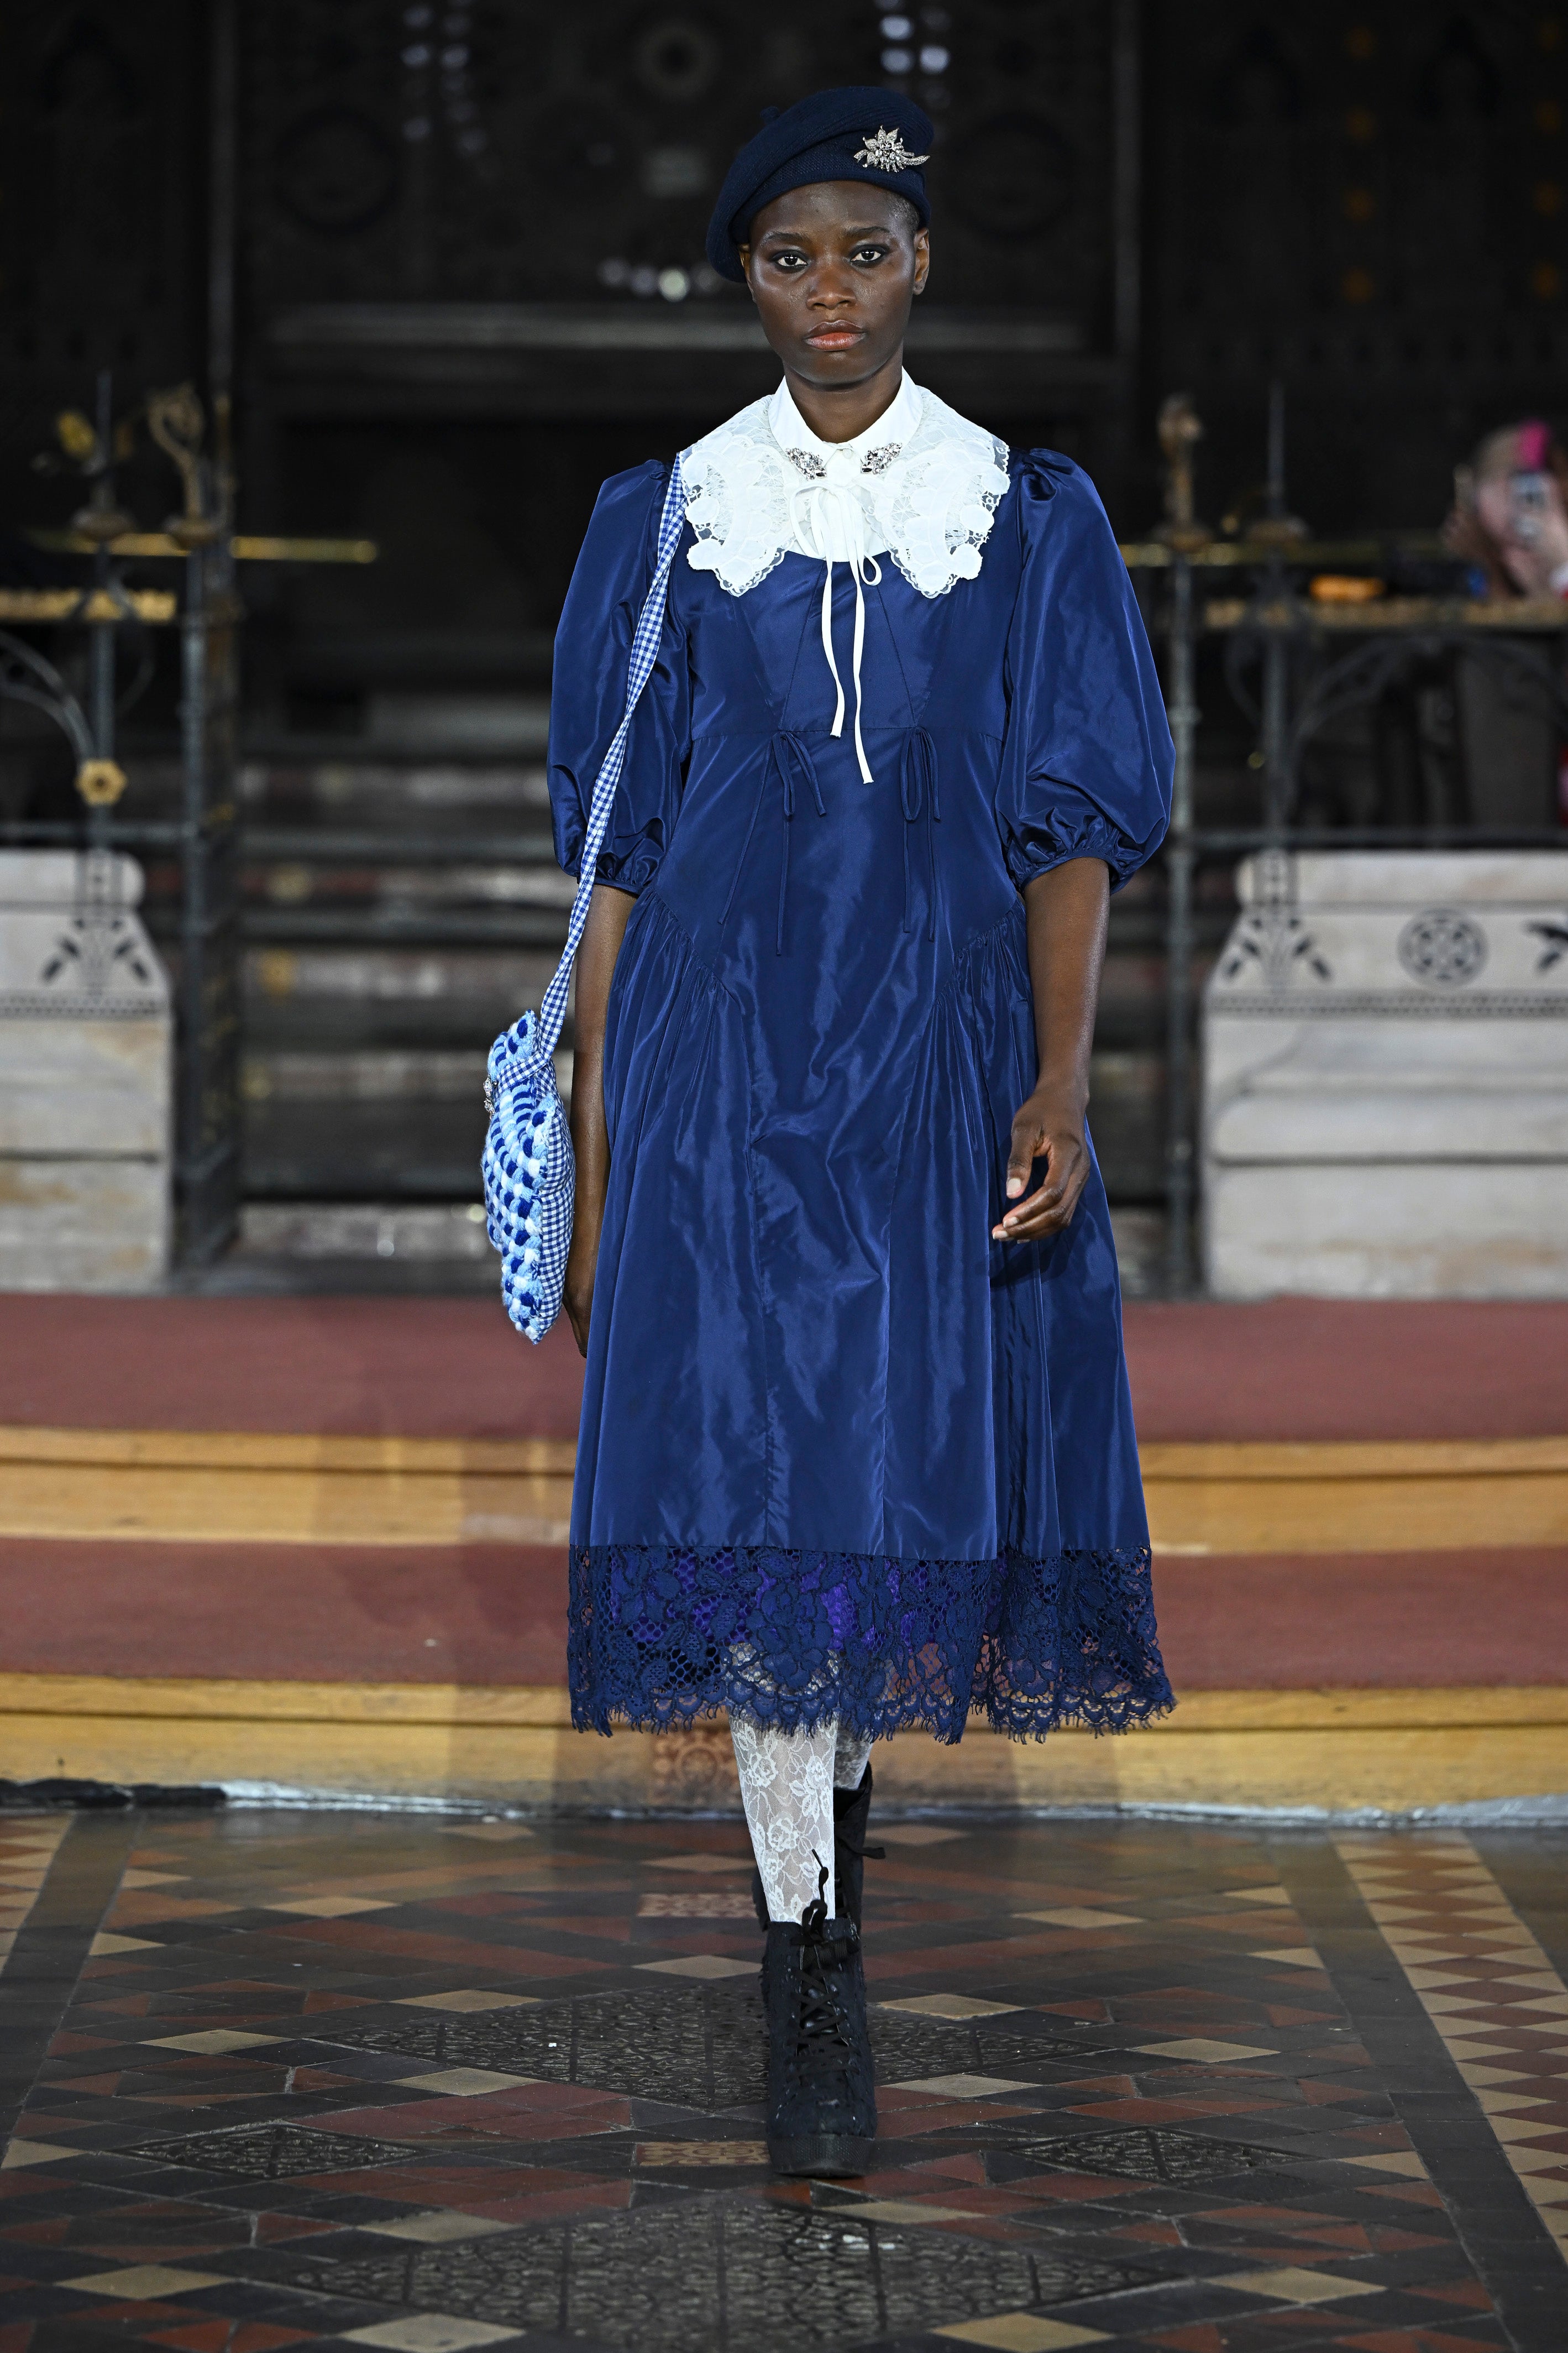 Peter Pan collars and berets featured prominently in the collection